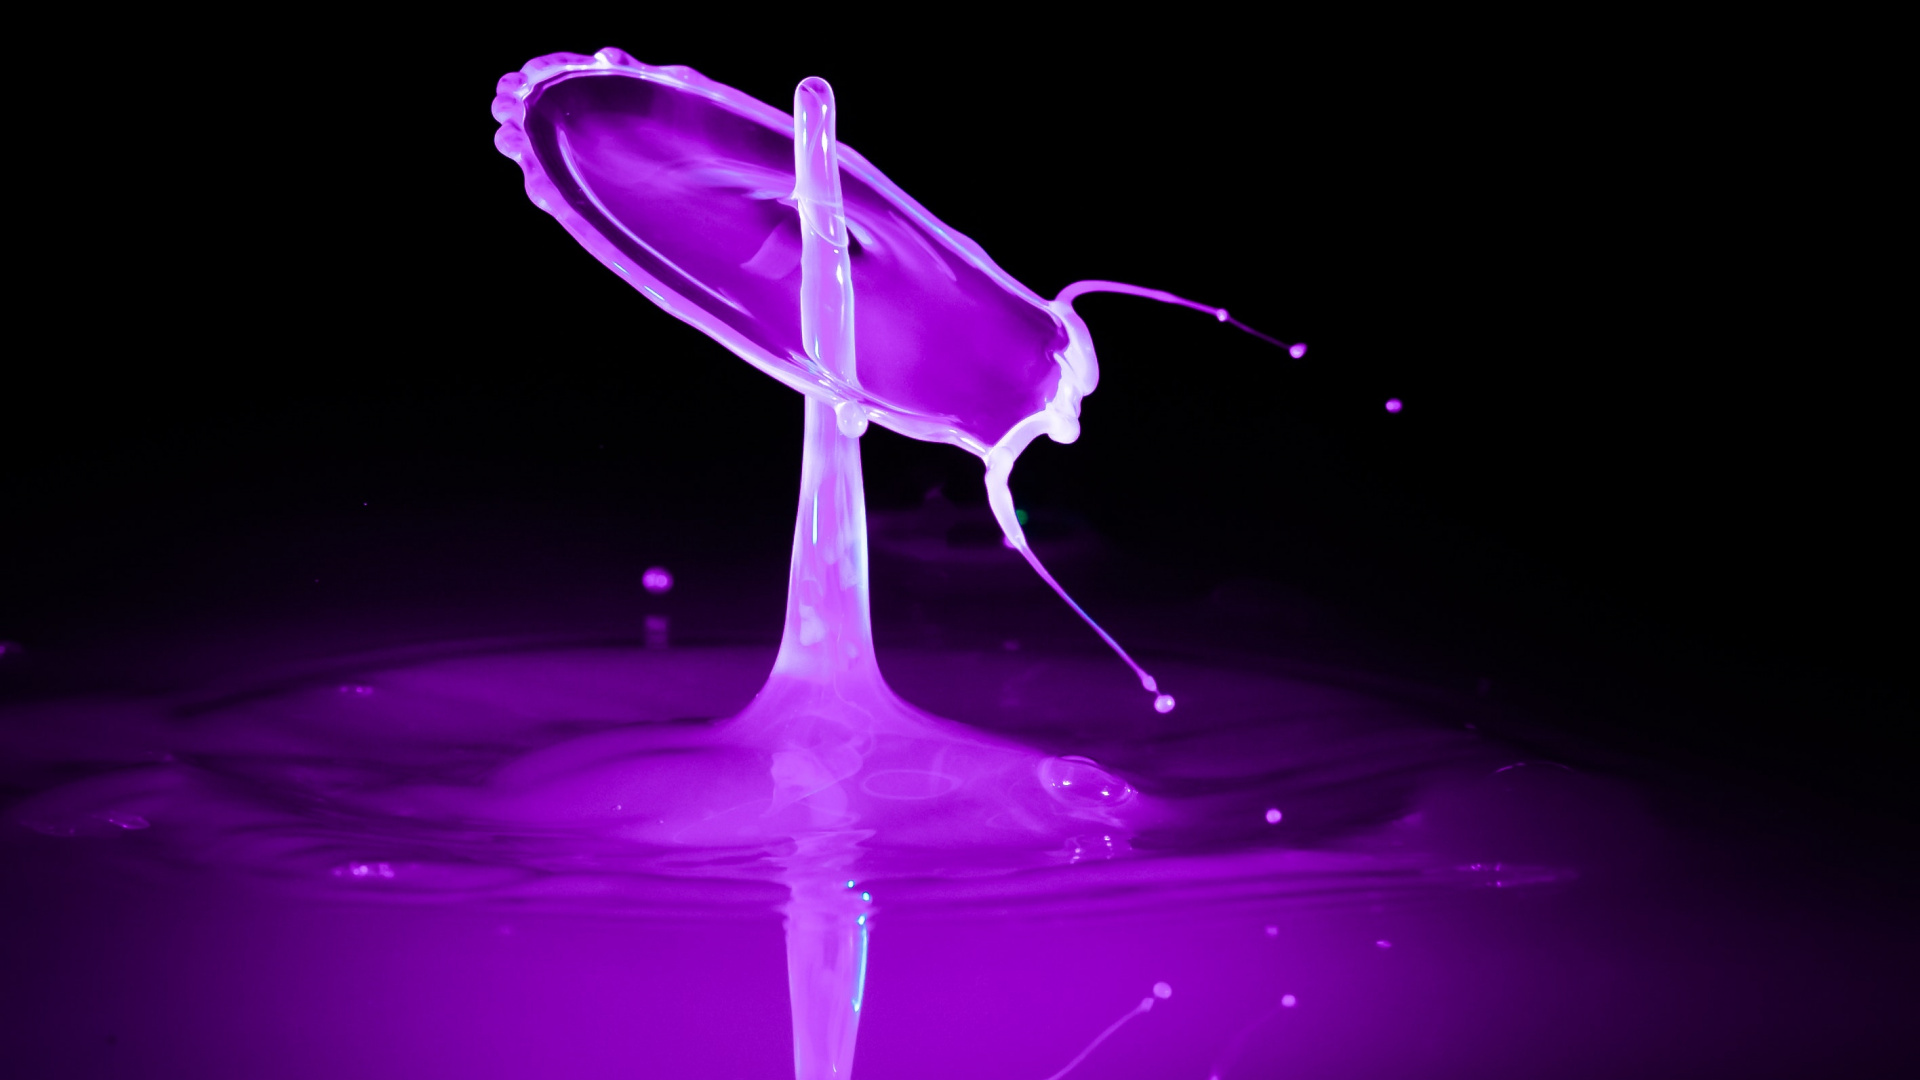 Purple and White Light Illustration. Wallpaper in 1920x1080 Resolution